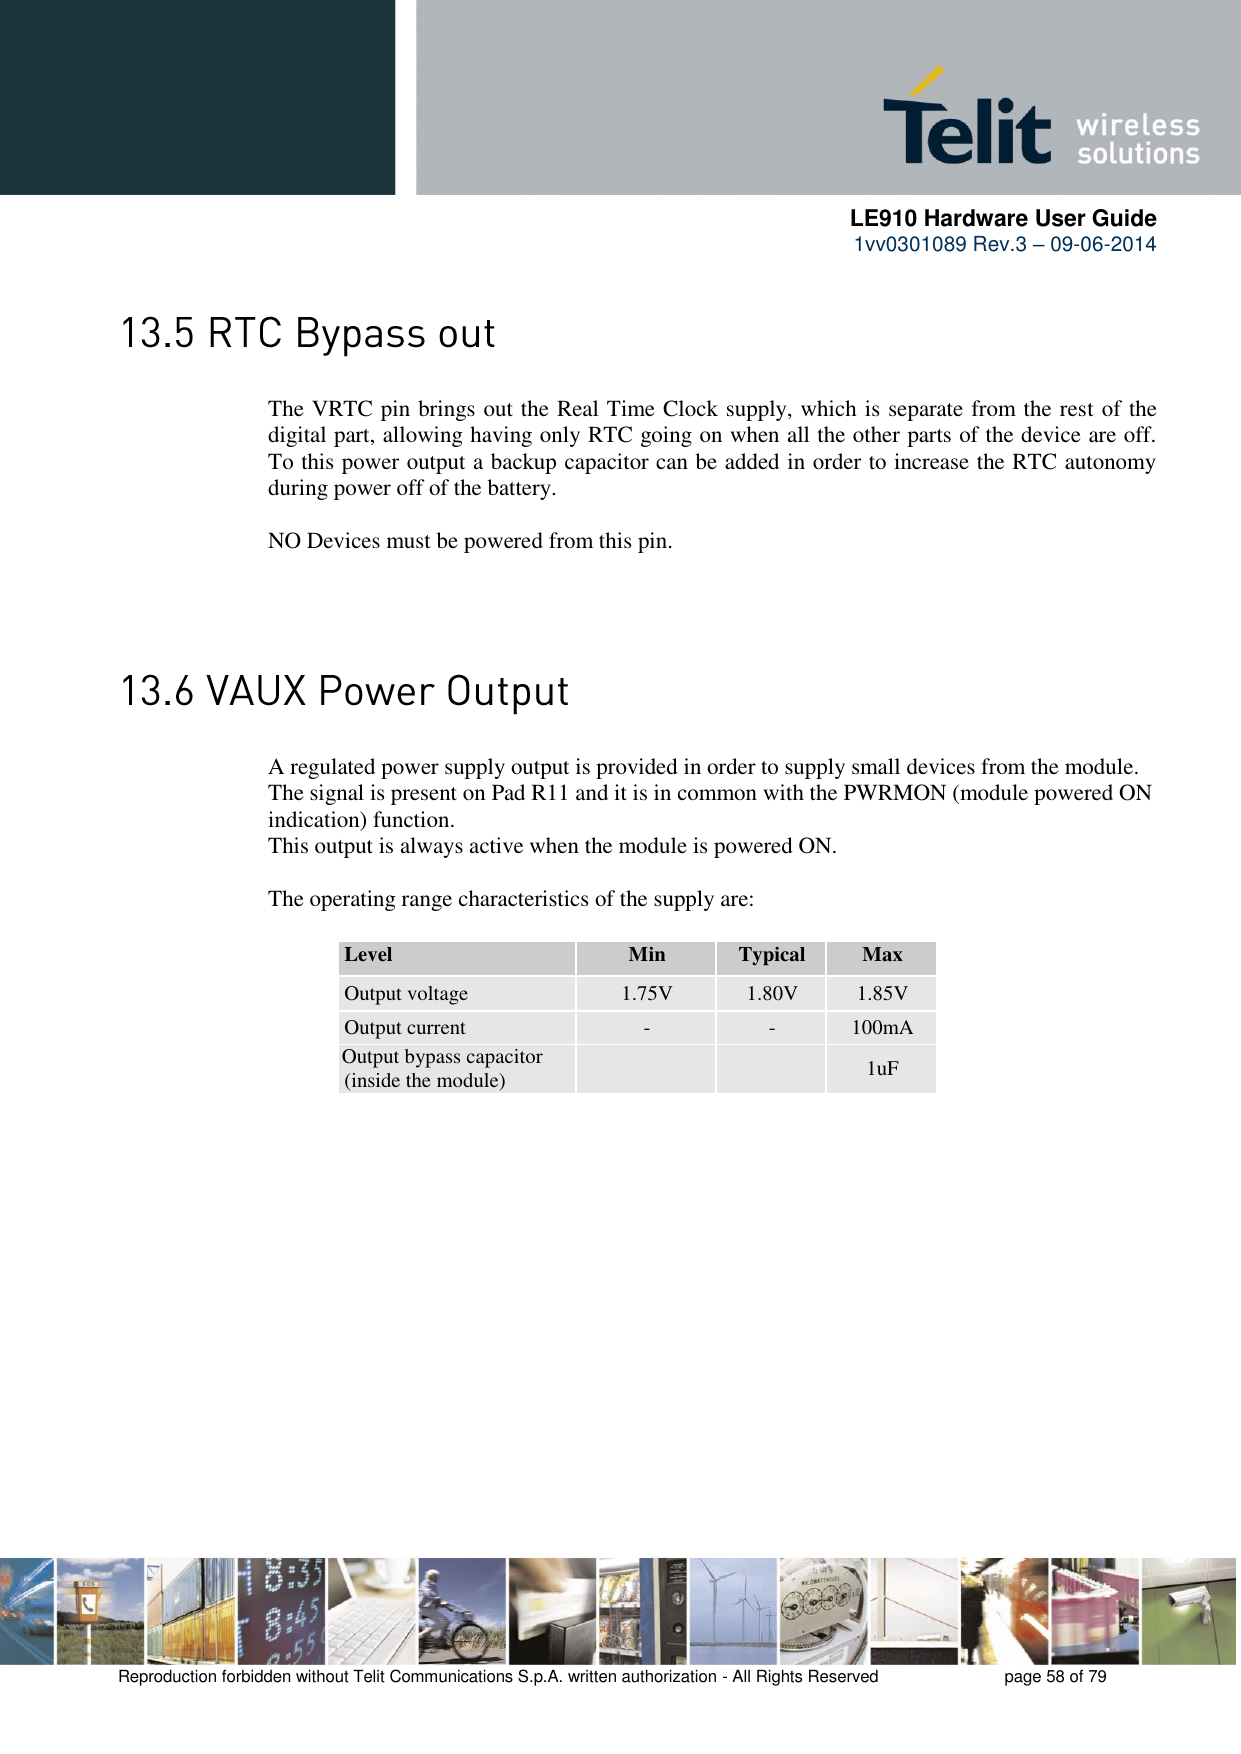      LE910 Hardware User Guide 1vv0301089 Rev.3 – 09-06-2014    Reproduction forbidden without Telit Communications S.p.A. written authorization - All Rights Reserved    page 58 of 79   The VRTC pin brings out the Real Time Clock supply, which is separate from the rest of the digital part, allowing having only RTC going on when all the other parts of the device are off. To this power output a backup capacitor can be added in order to increase the RTC autonomy during power off of the battery.   NO Devices must be powered from this pin.   A regulated power supply output is provided in order to supply small devices from the module. The signal is present on Pad R11 and it is in common with the PWRMON (module powered ON indication) function. This output is always active when the module is powered ON.  The operating range characteristics of the supply are: Level Min Typical Max Output voltage 1.75V 1.80V 1.85V Output current - - 100mA Output bypass capacitor (inside the module)   1uF 